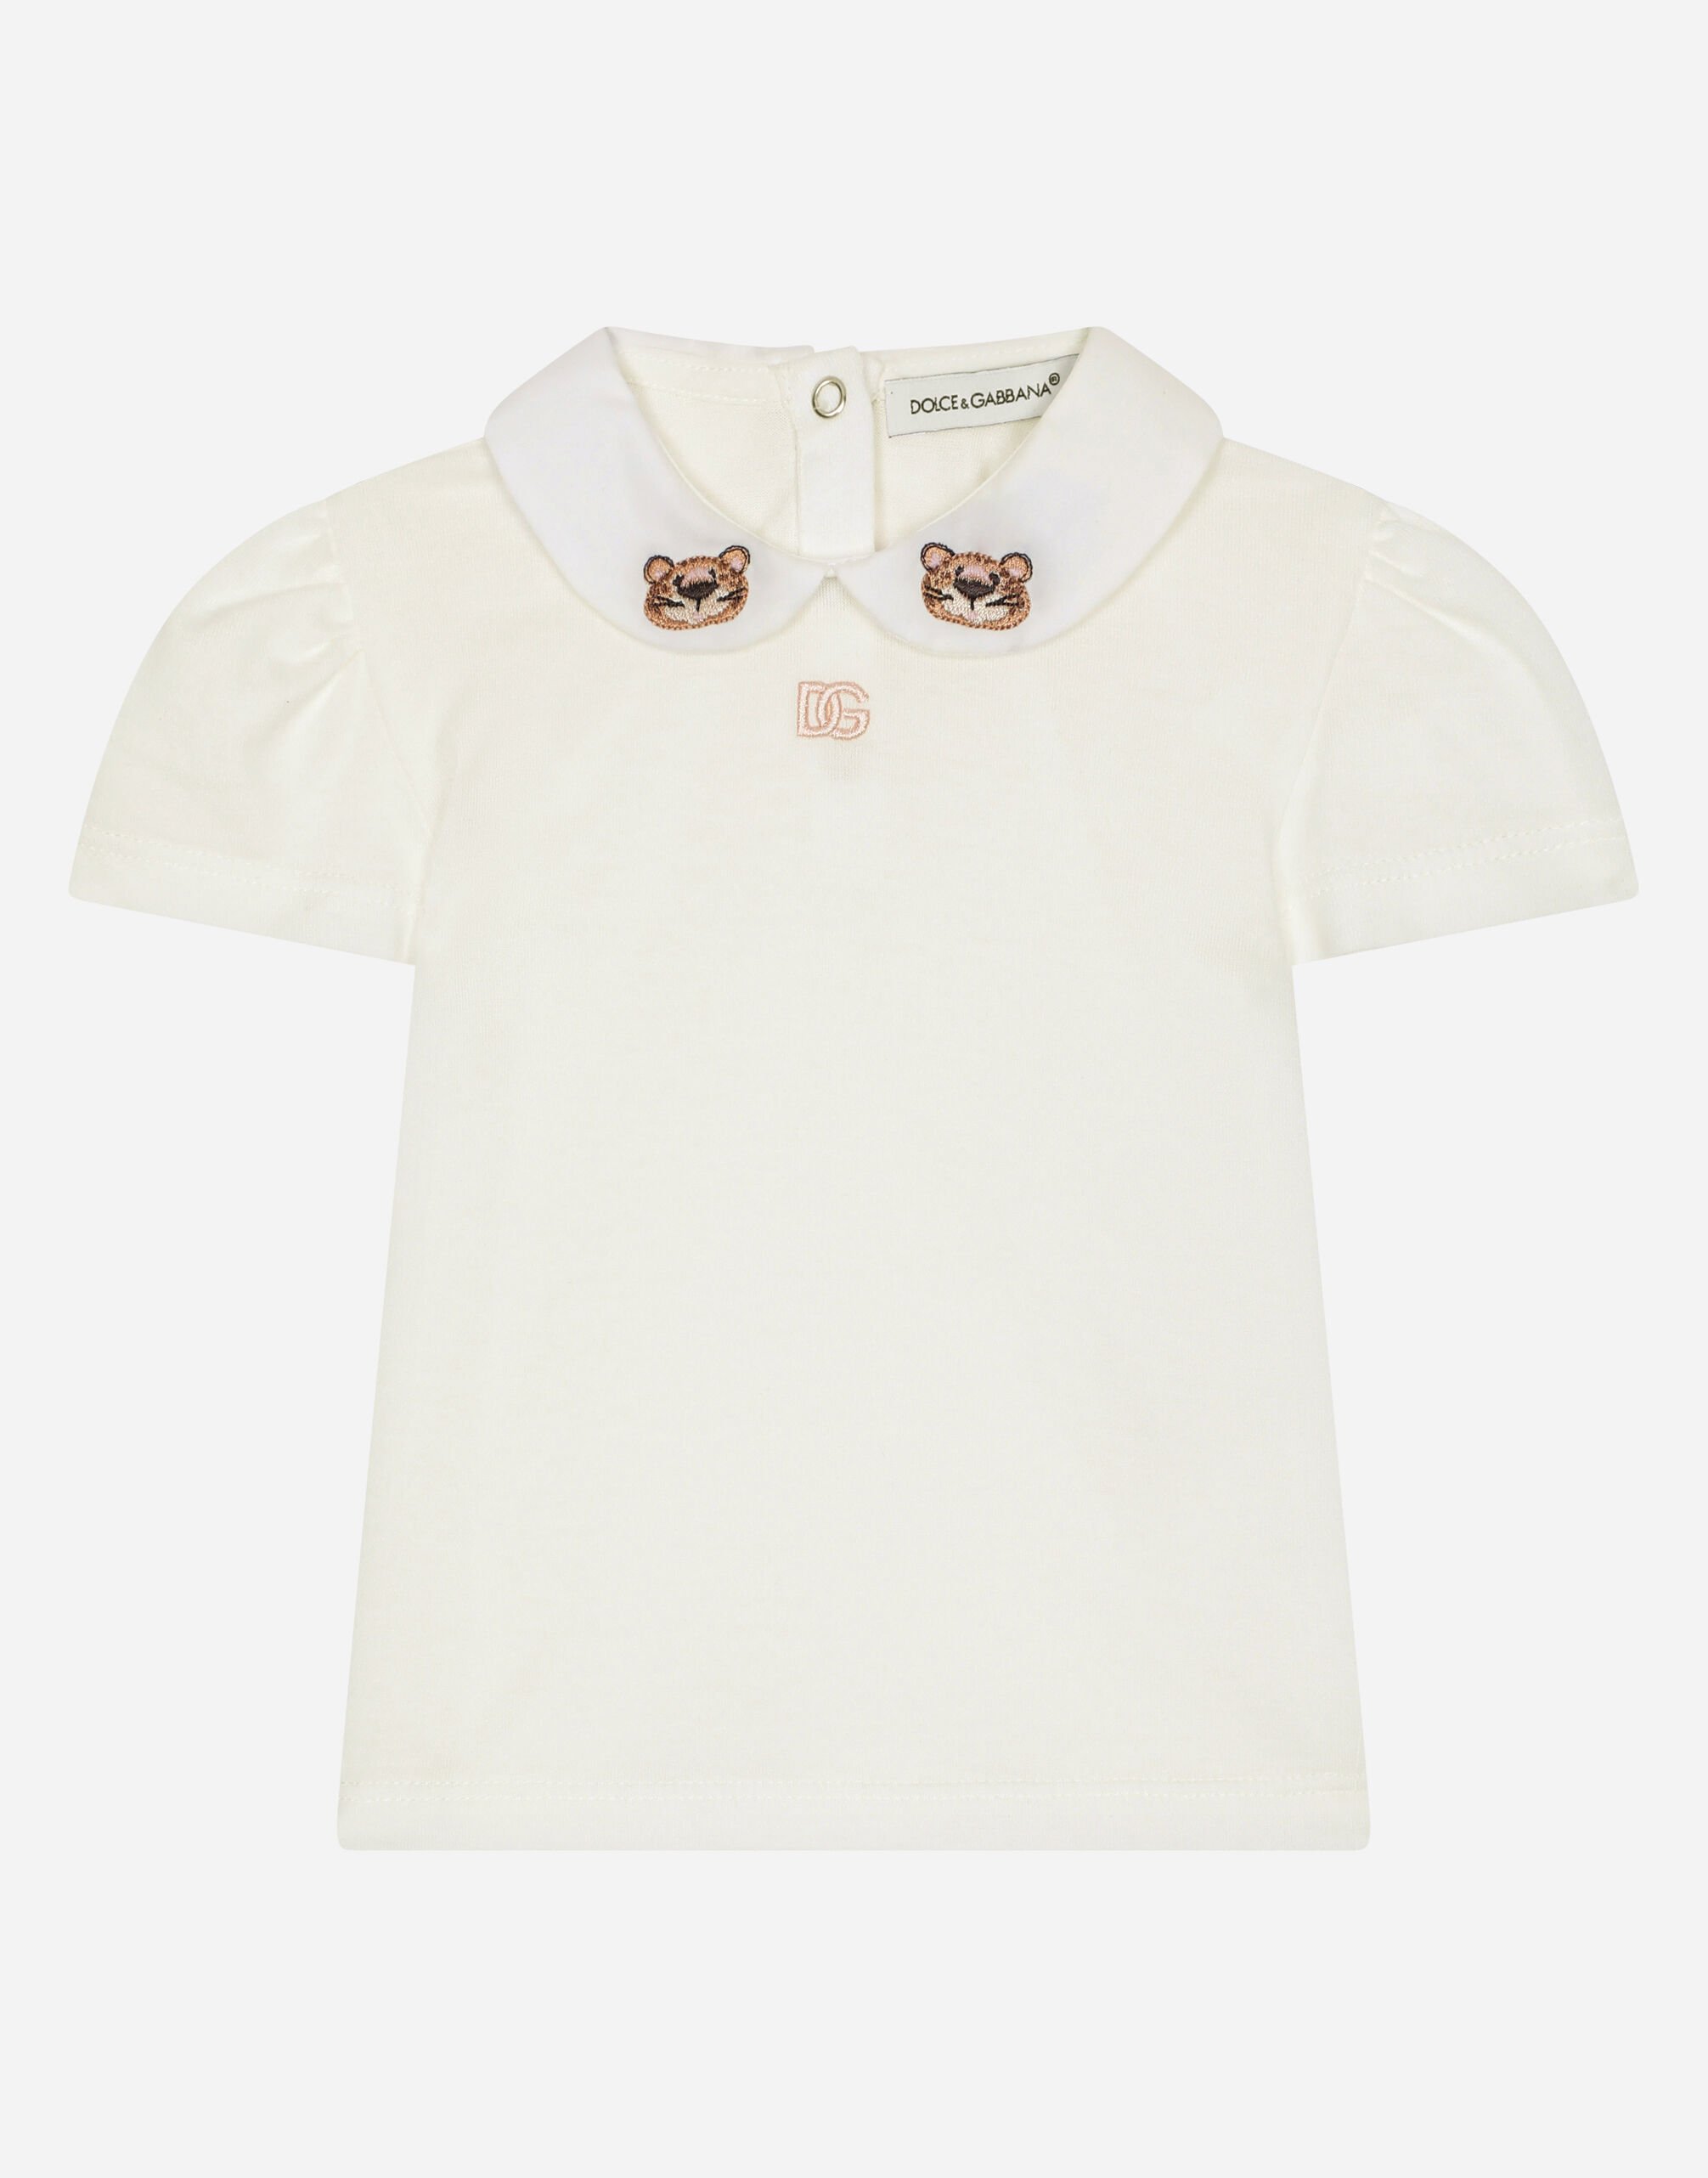 Dolce & Gabbana Jersey T-shirt with baby leopard embroidery Yellow L2JWAXG7NUR